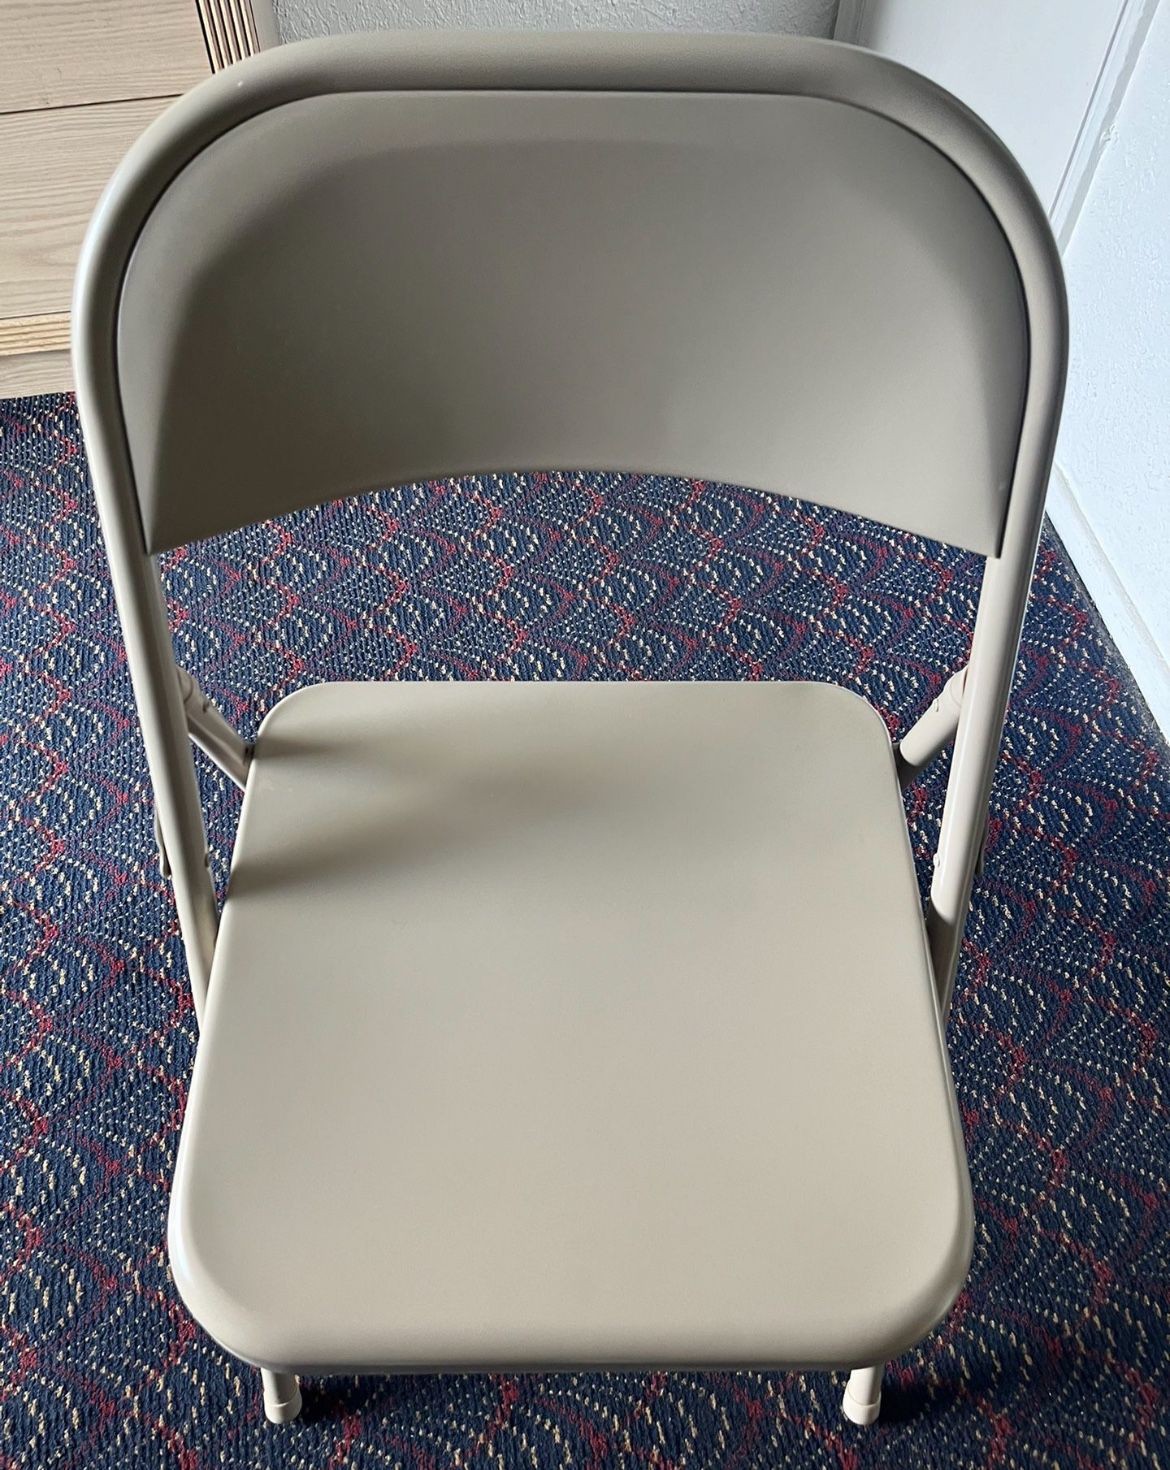 Steel Folding Chair- New Never Used